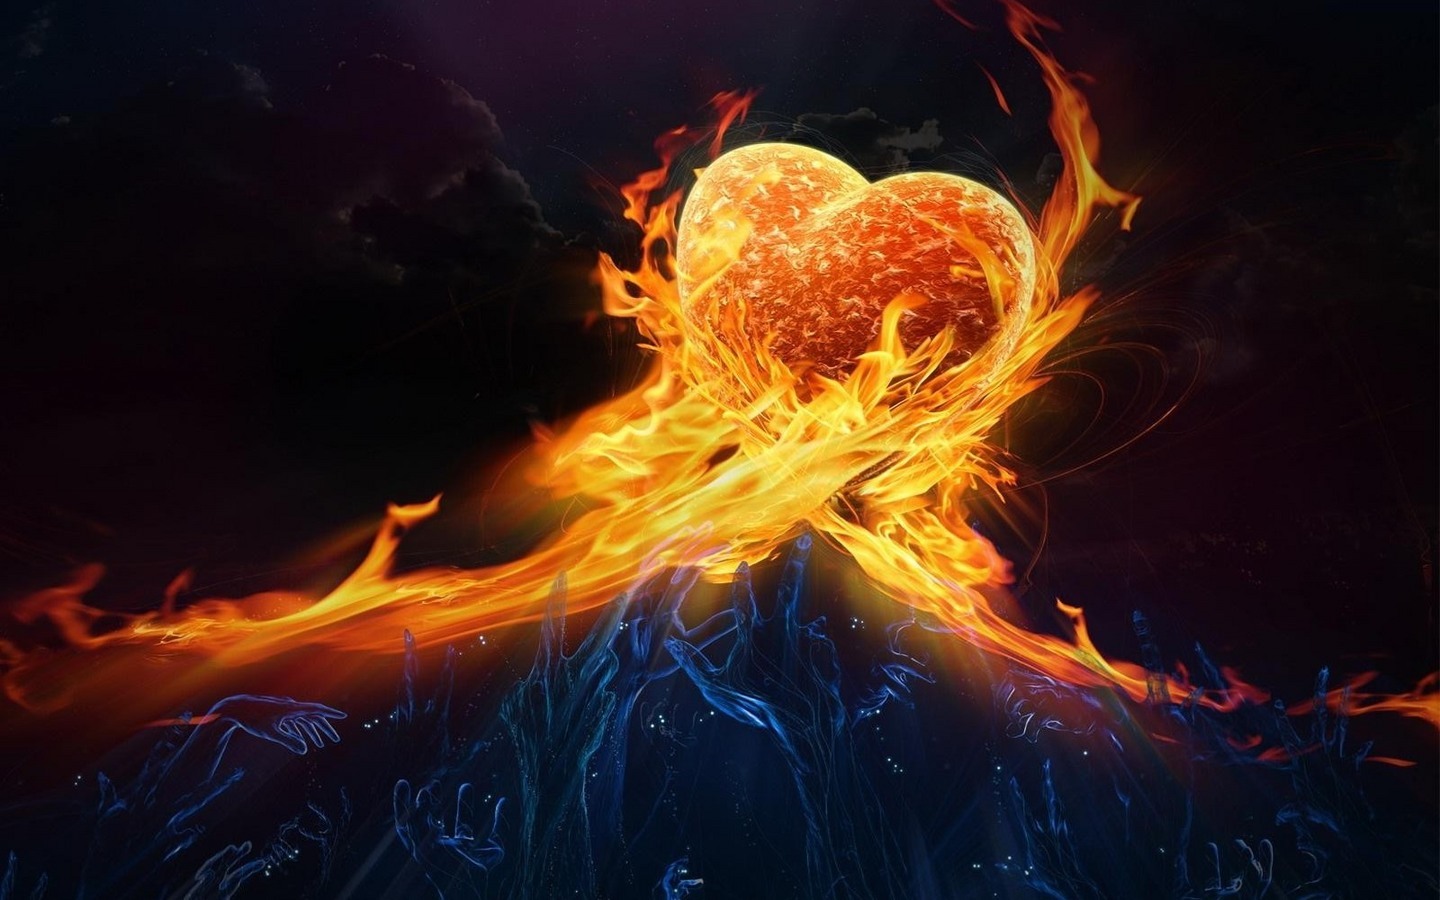 pictures, valentine's day, art, fire, hearts wallpaper for mobile